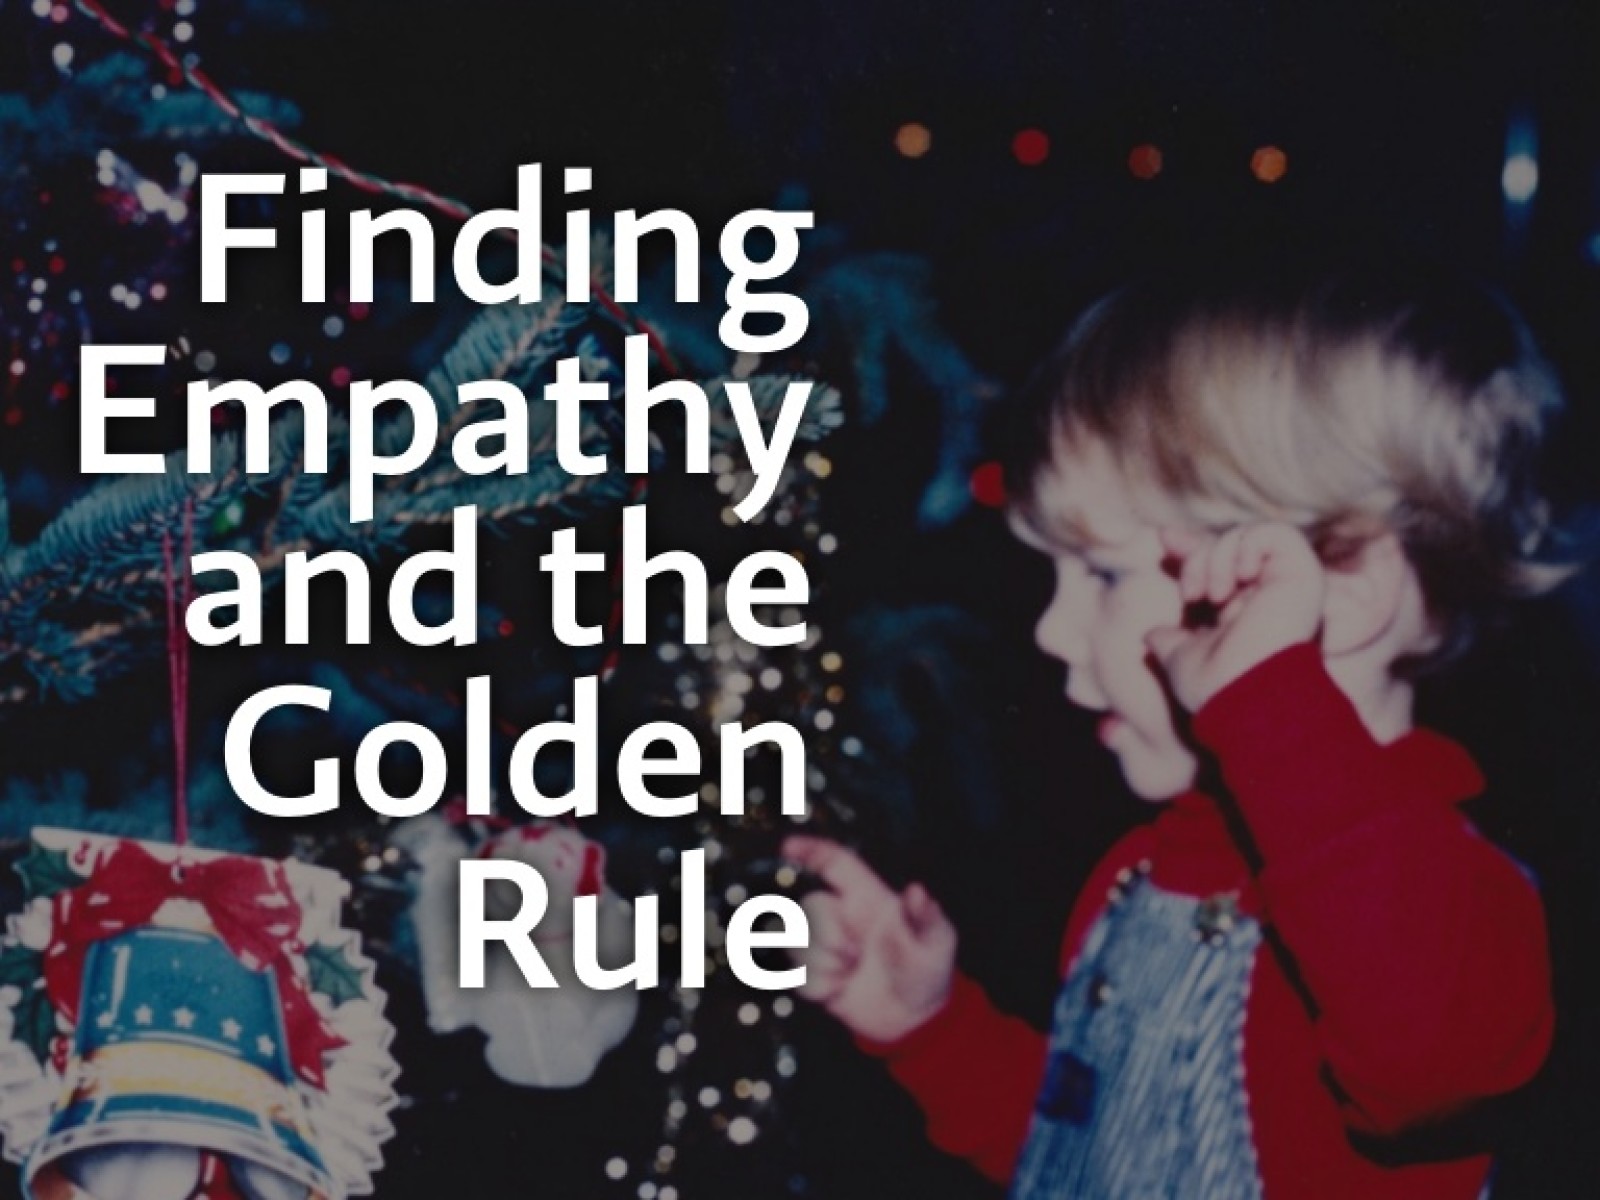 Finding Empathy and the Golden Rule